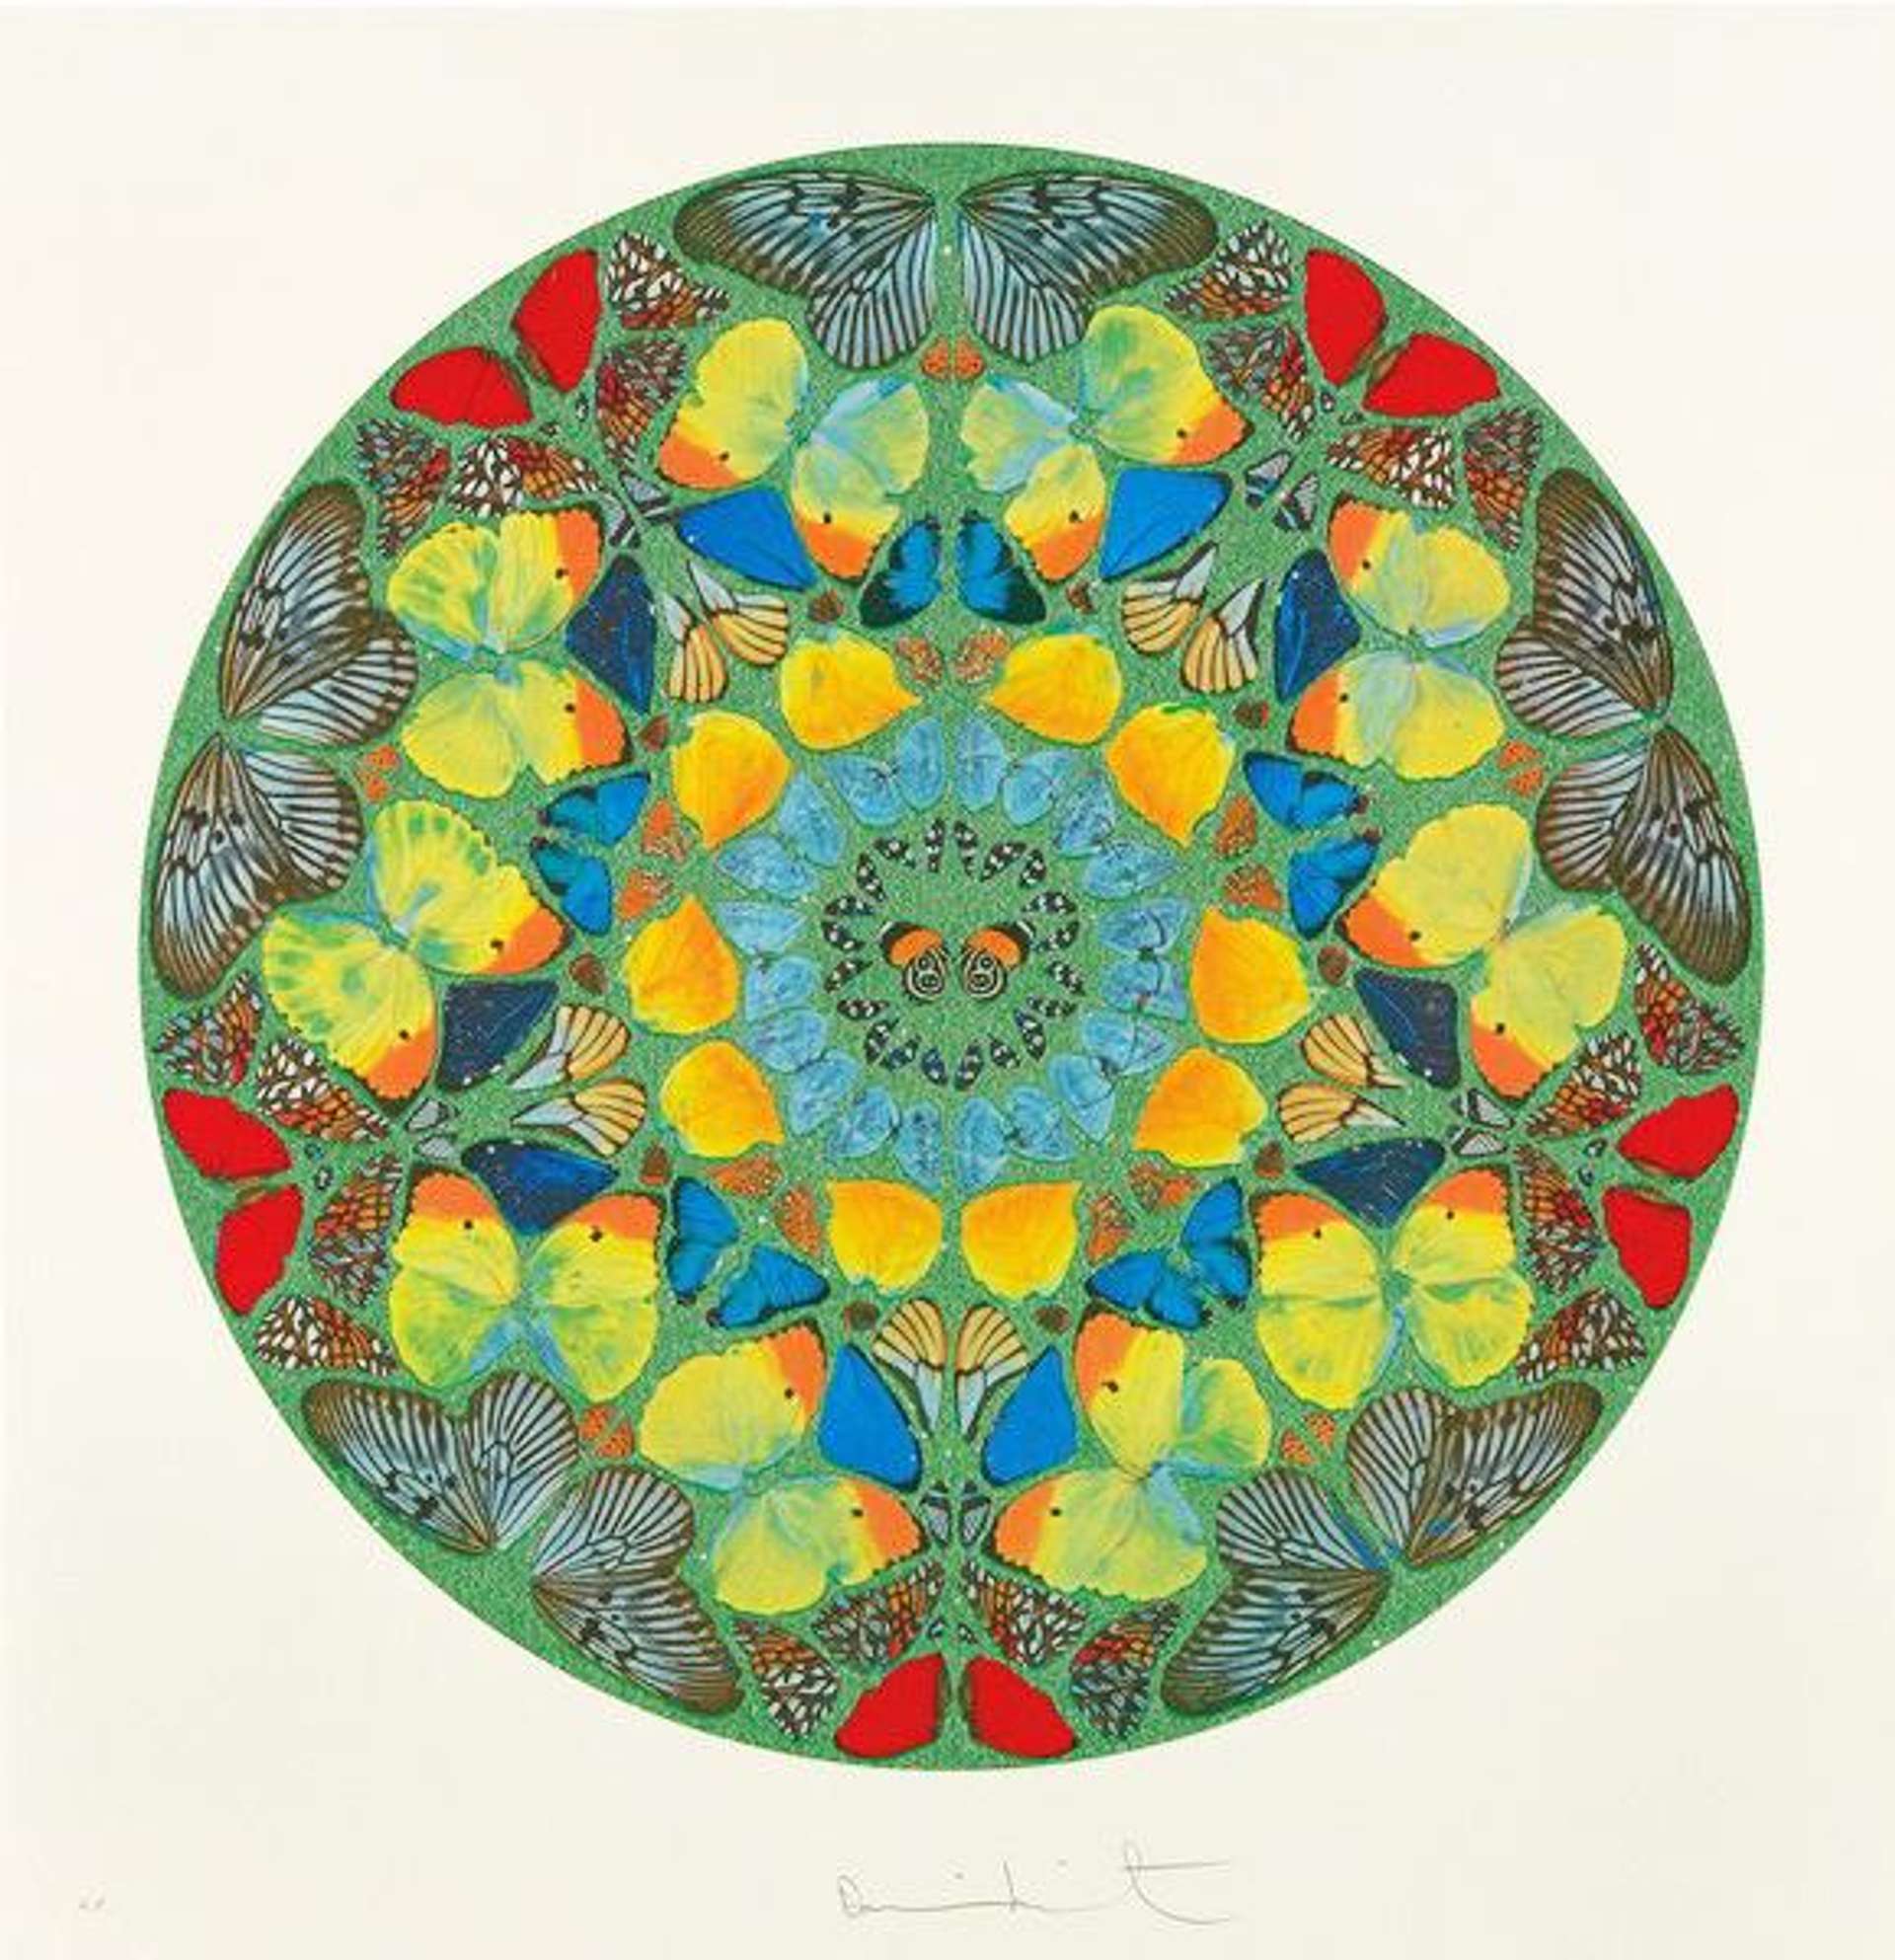 Several butterfly wings arranged to create. acircular pattern reminiscent of a mandala, against a jade green background.